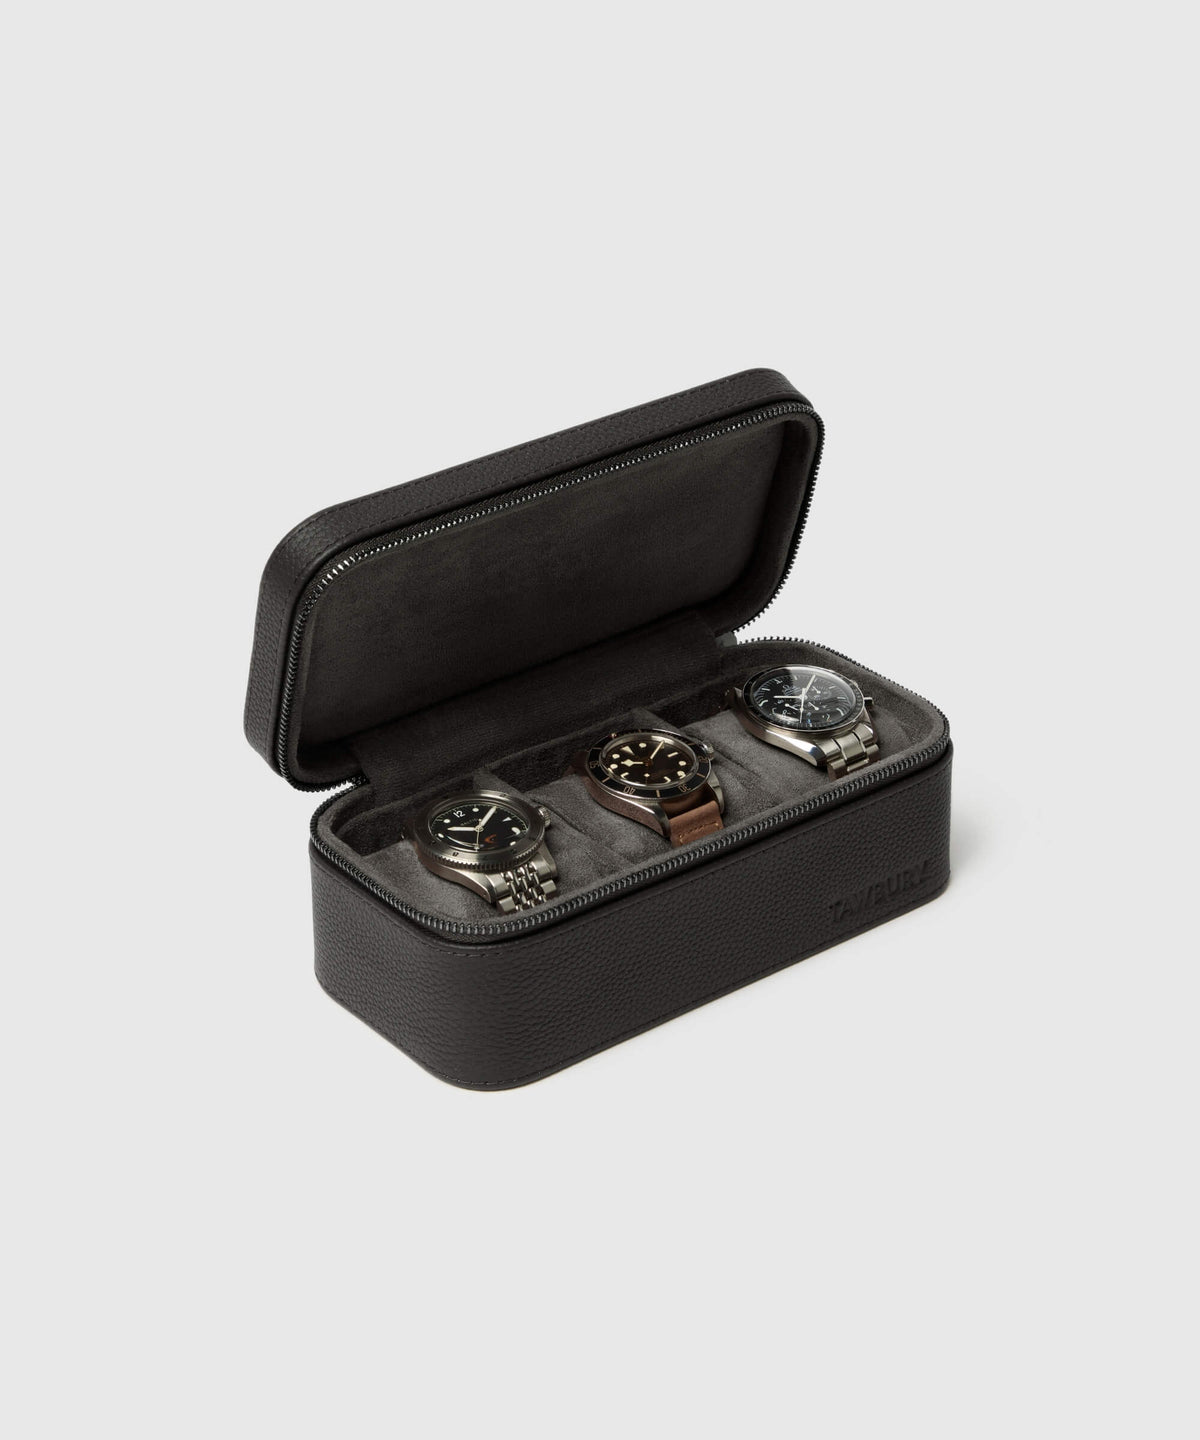 A Fraser 3 Watch Travel Case - Black designed with functionality and protection in mind. It features a TAWBURY leather exterior for a luxurious look and feel, and a soft interior lining to prevent scratches and damage to your watches.